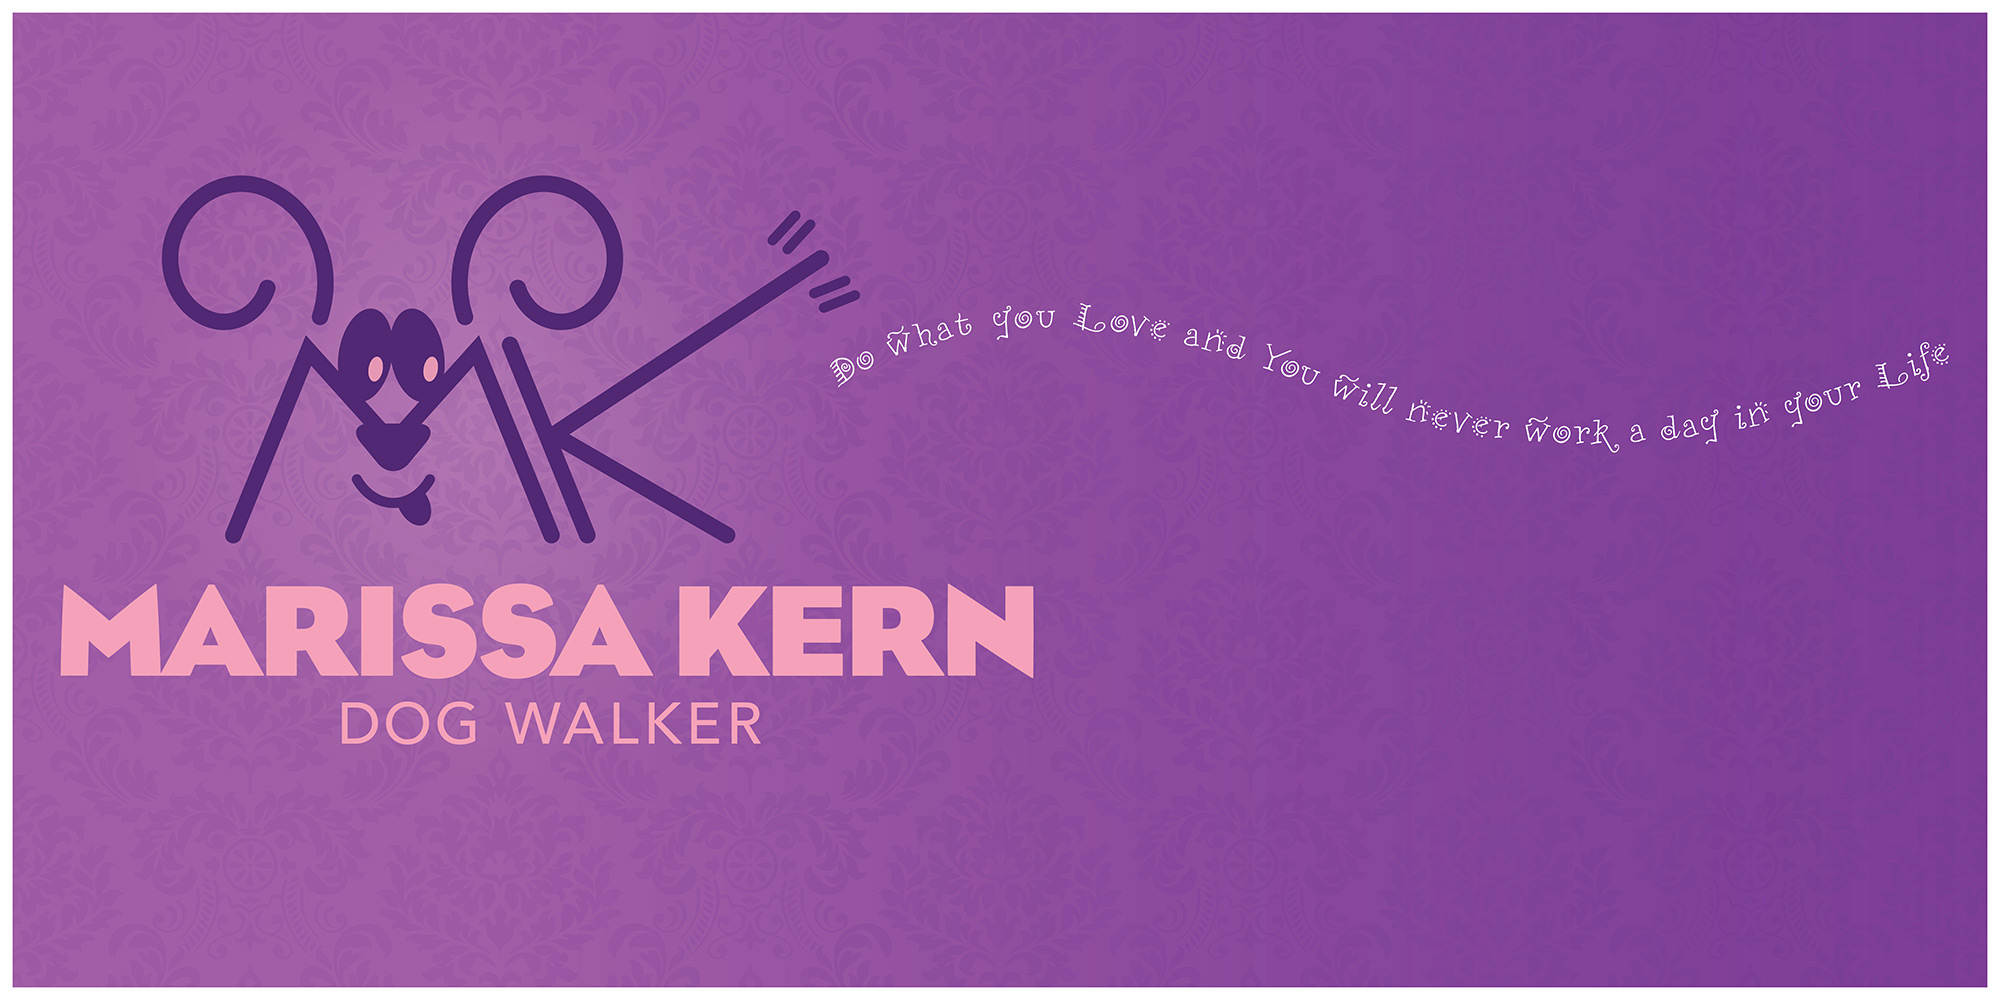 Jeff Kern design for "Do What You Love"